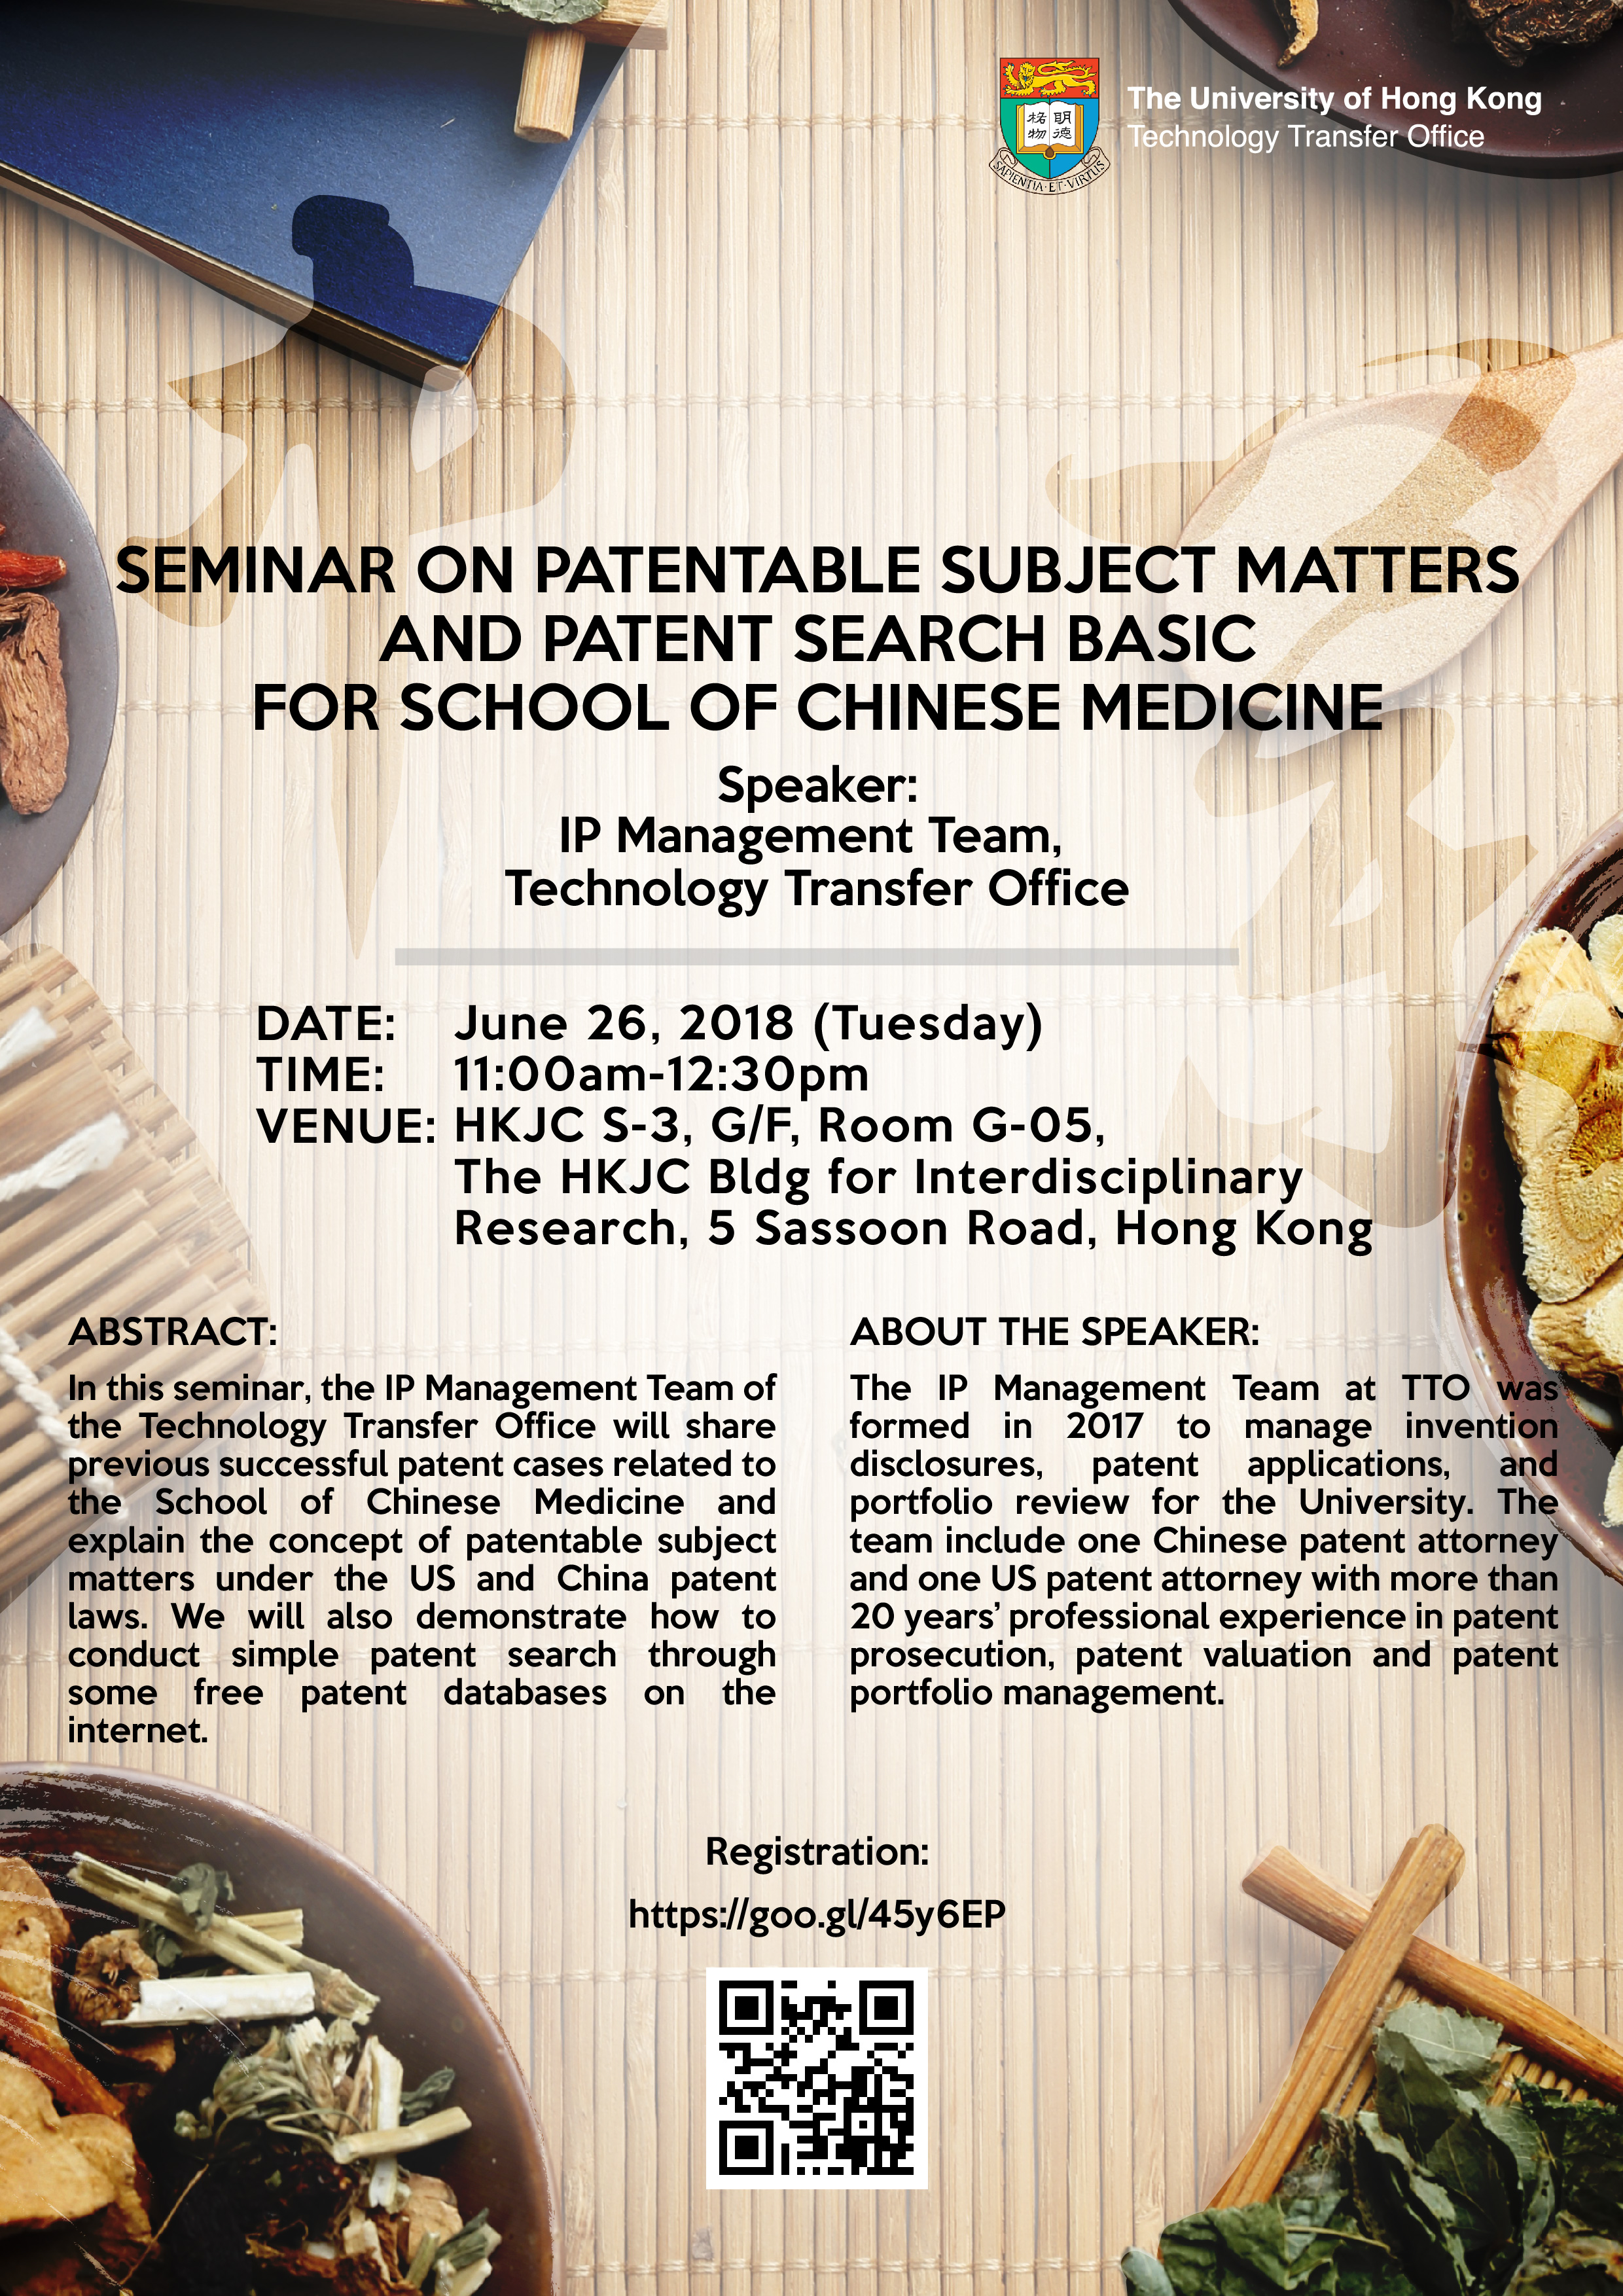 Seminar on Patentable Subject Matters and Patent Search Basic for School of Chinese Medicine